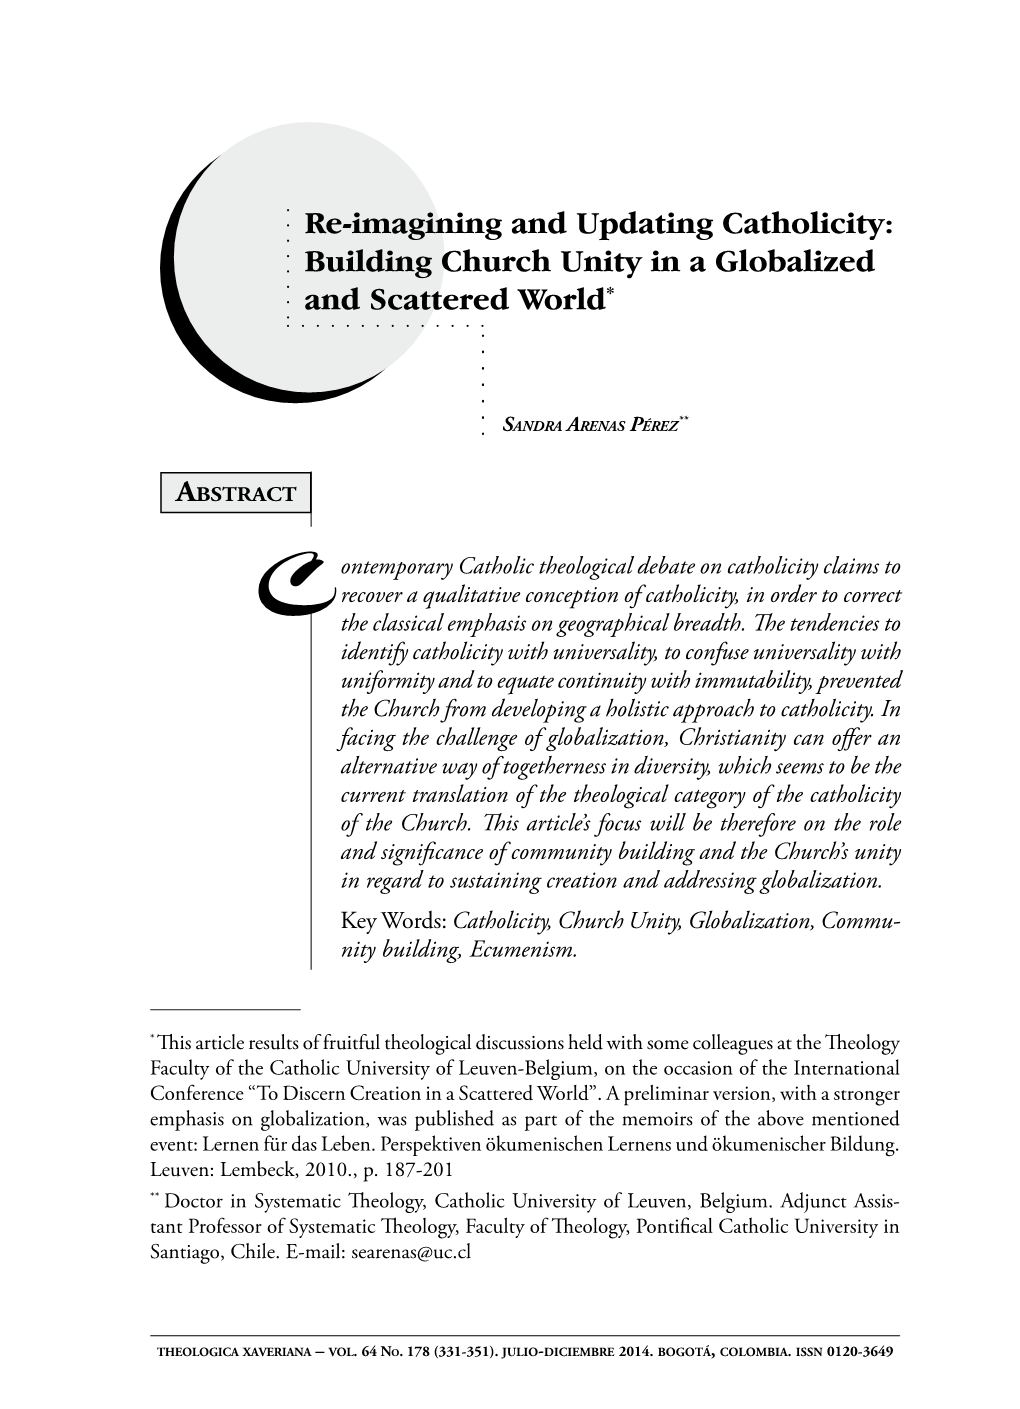 Re-Imagining and Updating Catholicity: Building Church Unity in a Globalized and Scattered World*